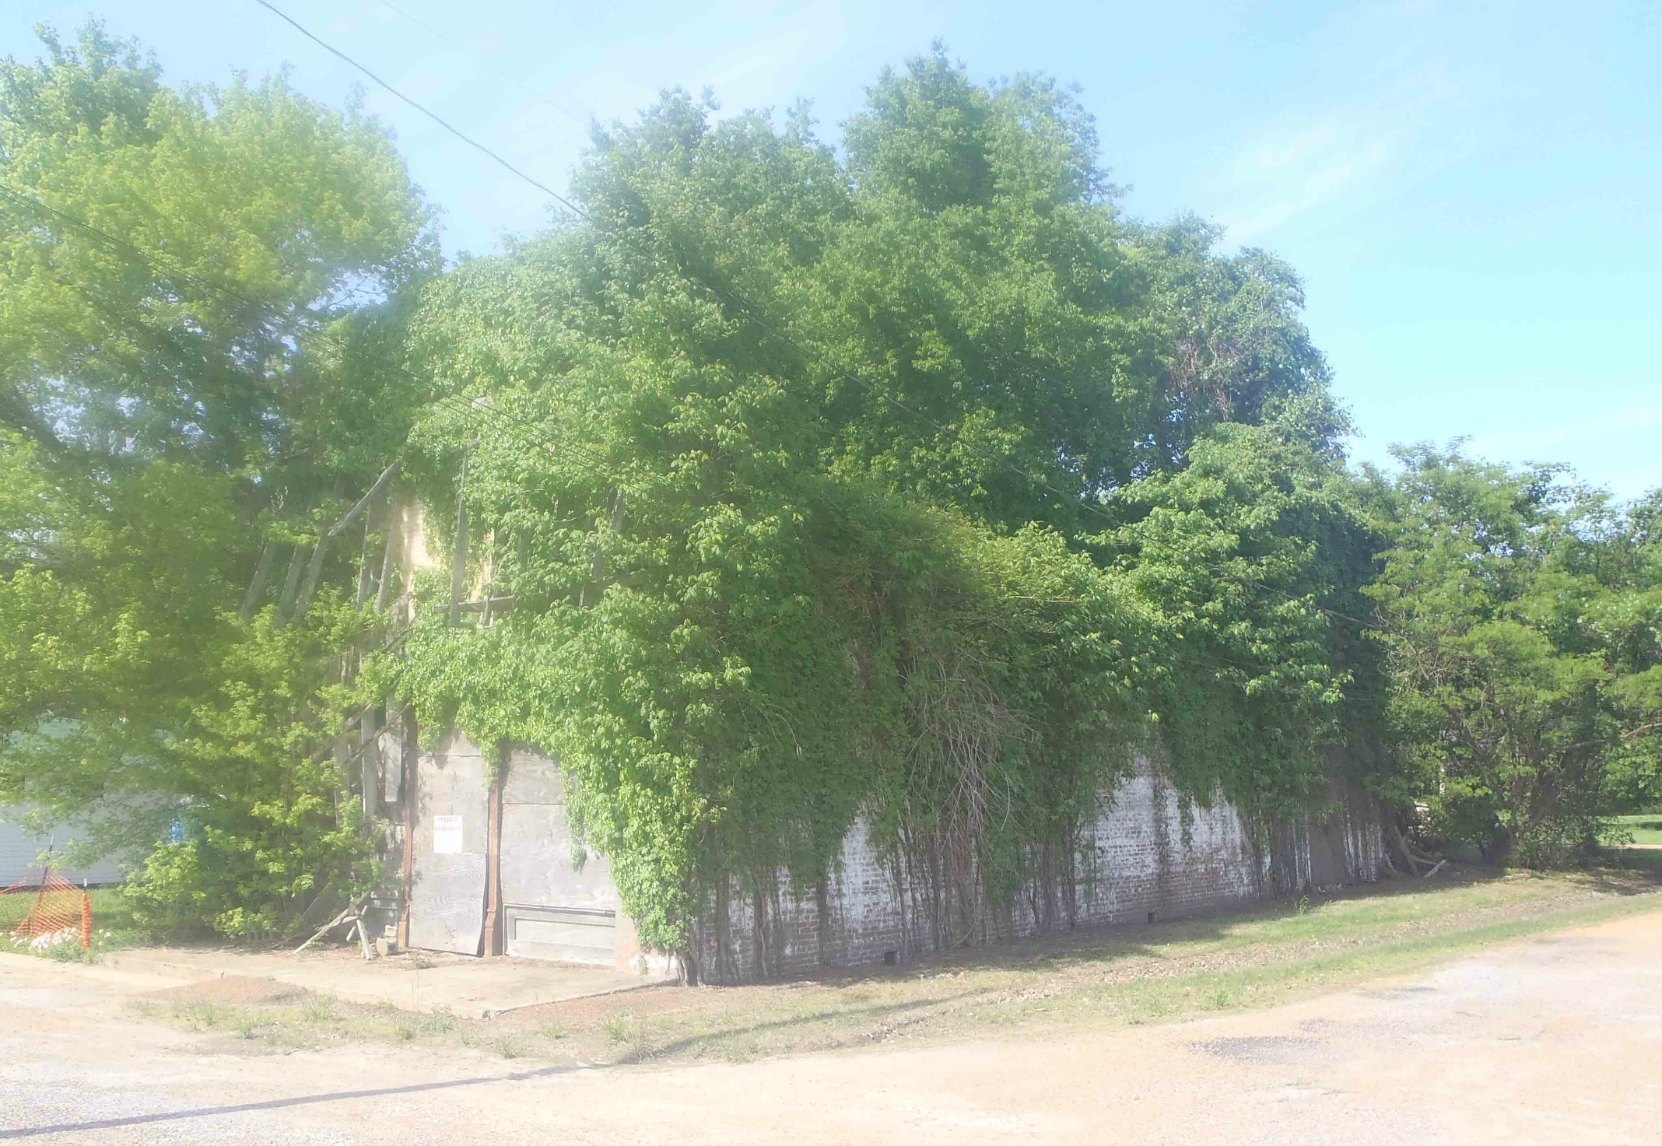 The ruins of Bryant's Grocery, Money, Leflore County, Mississippi. This was once the front and side of the building.